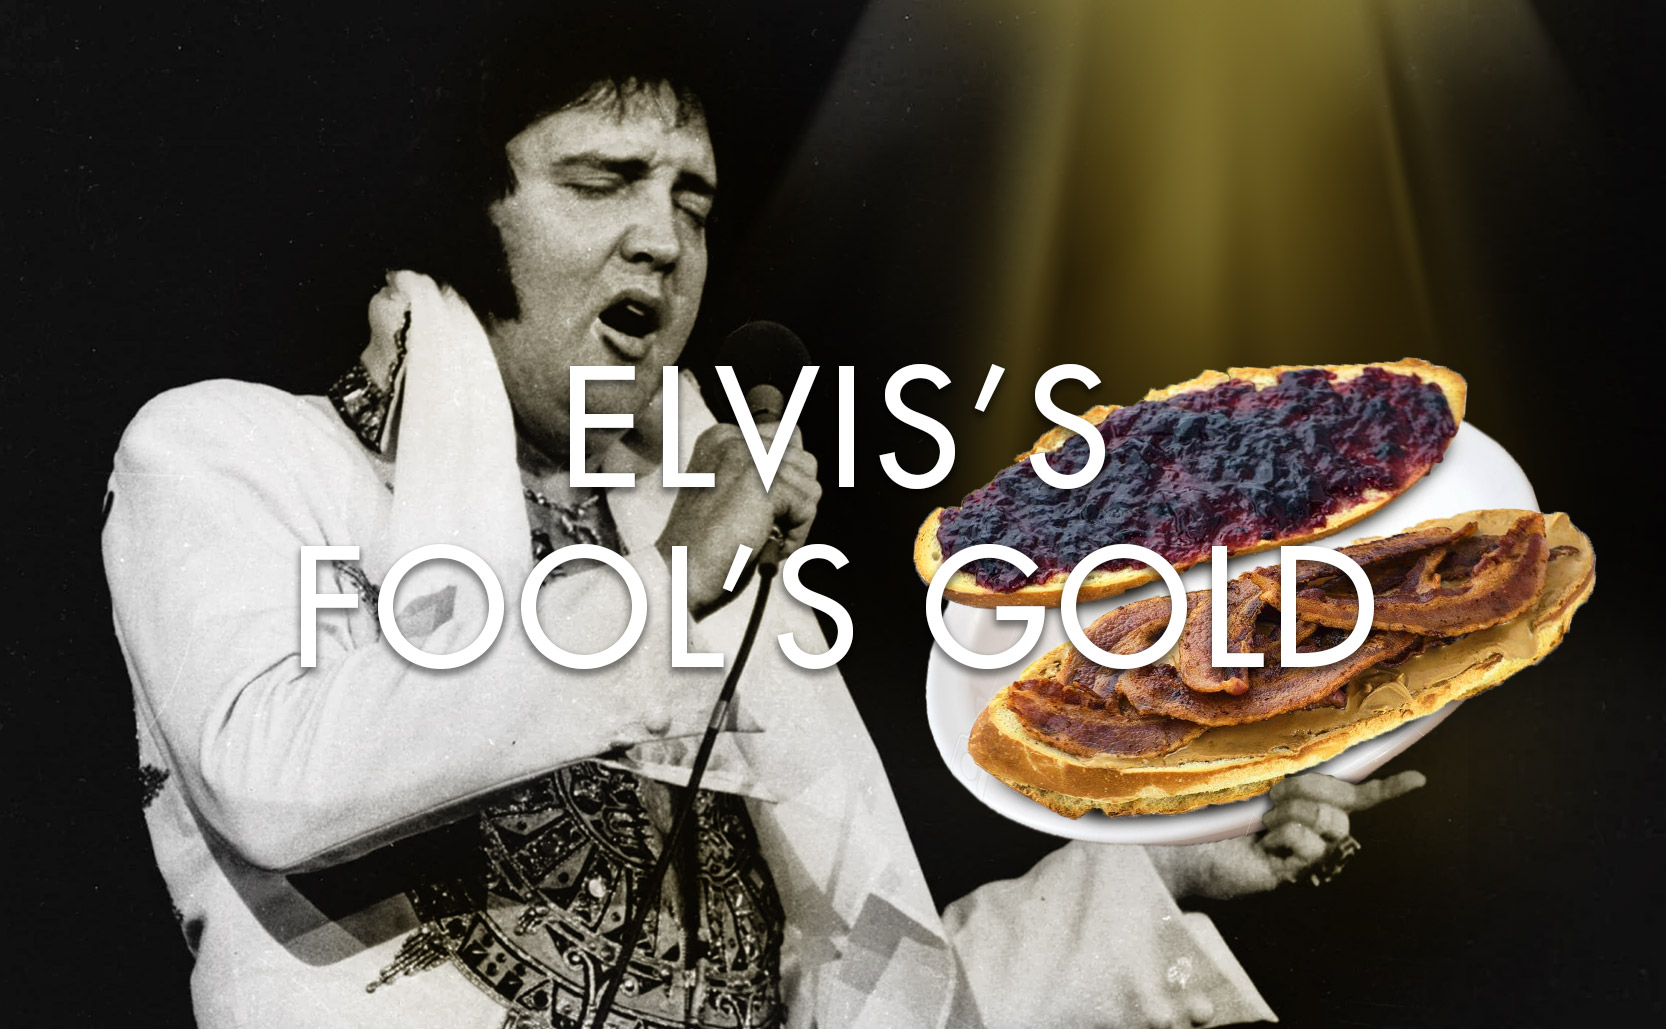 You are currently viewing Elvis’s Fool’s Gold